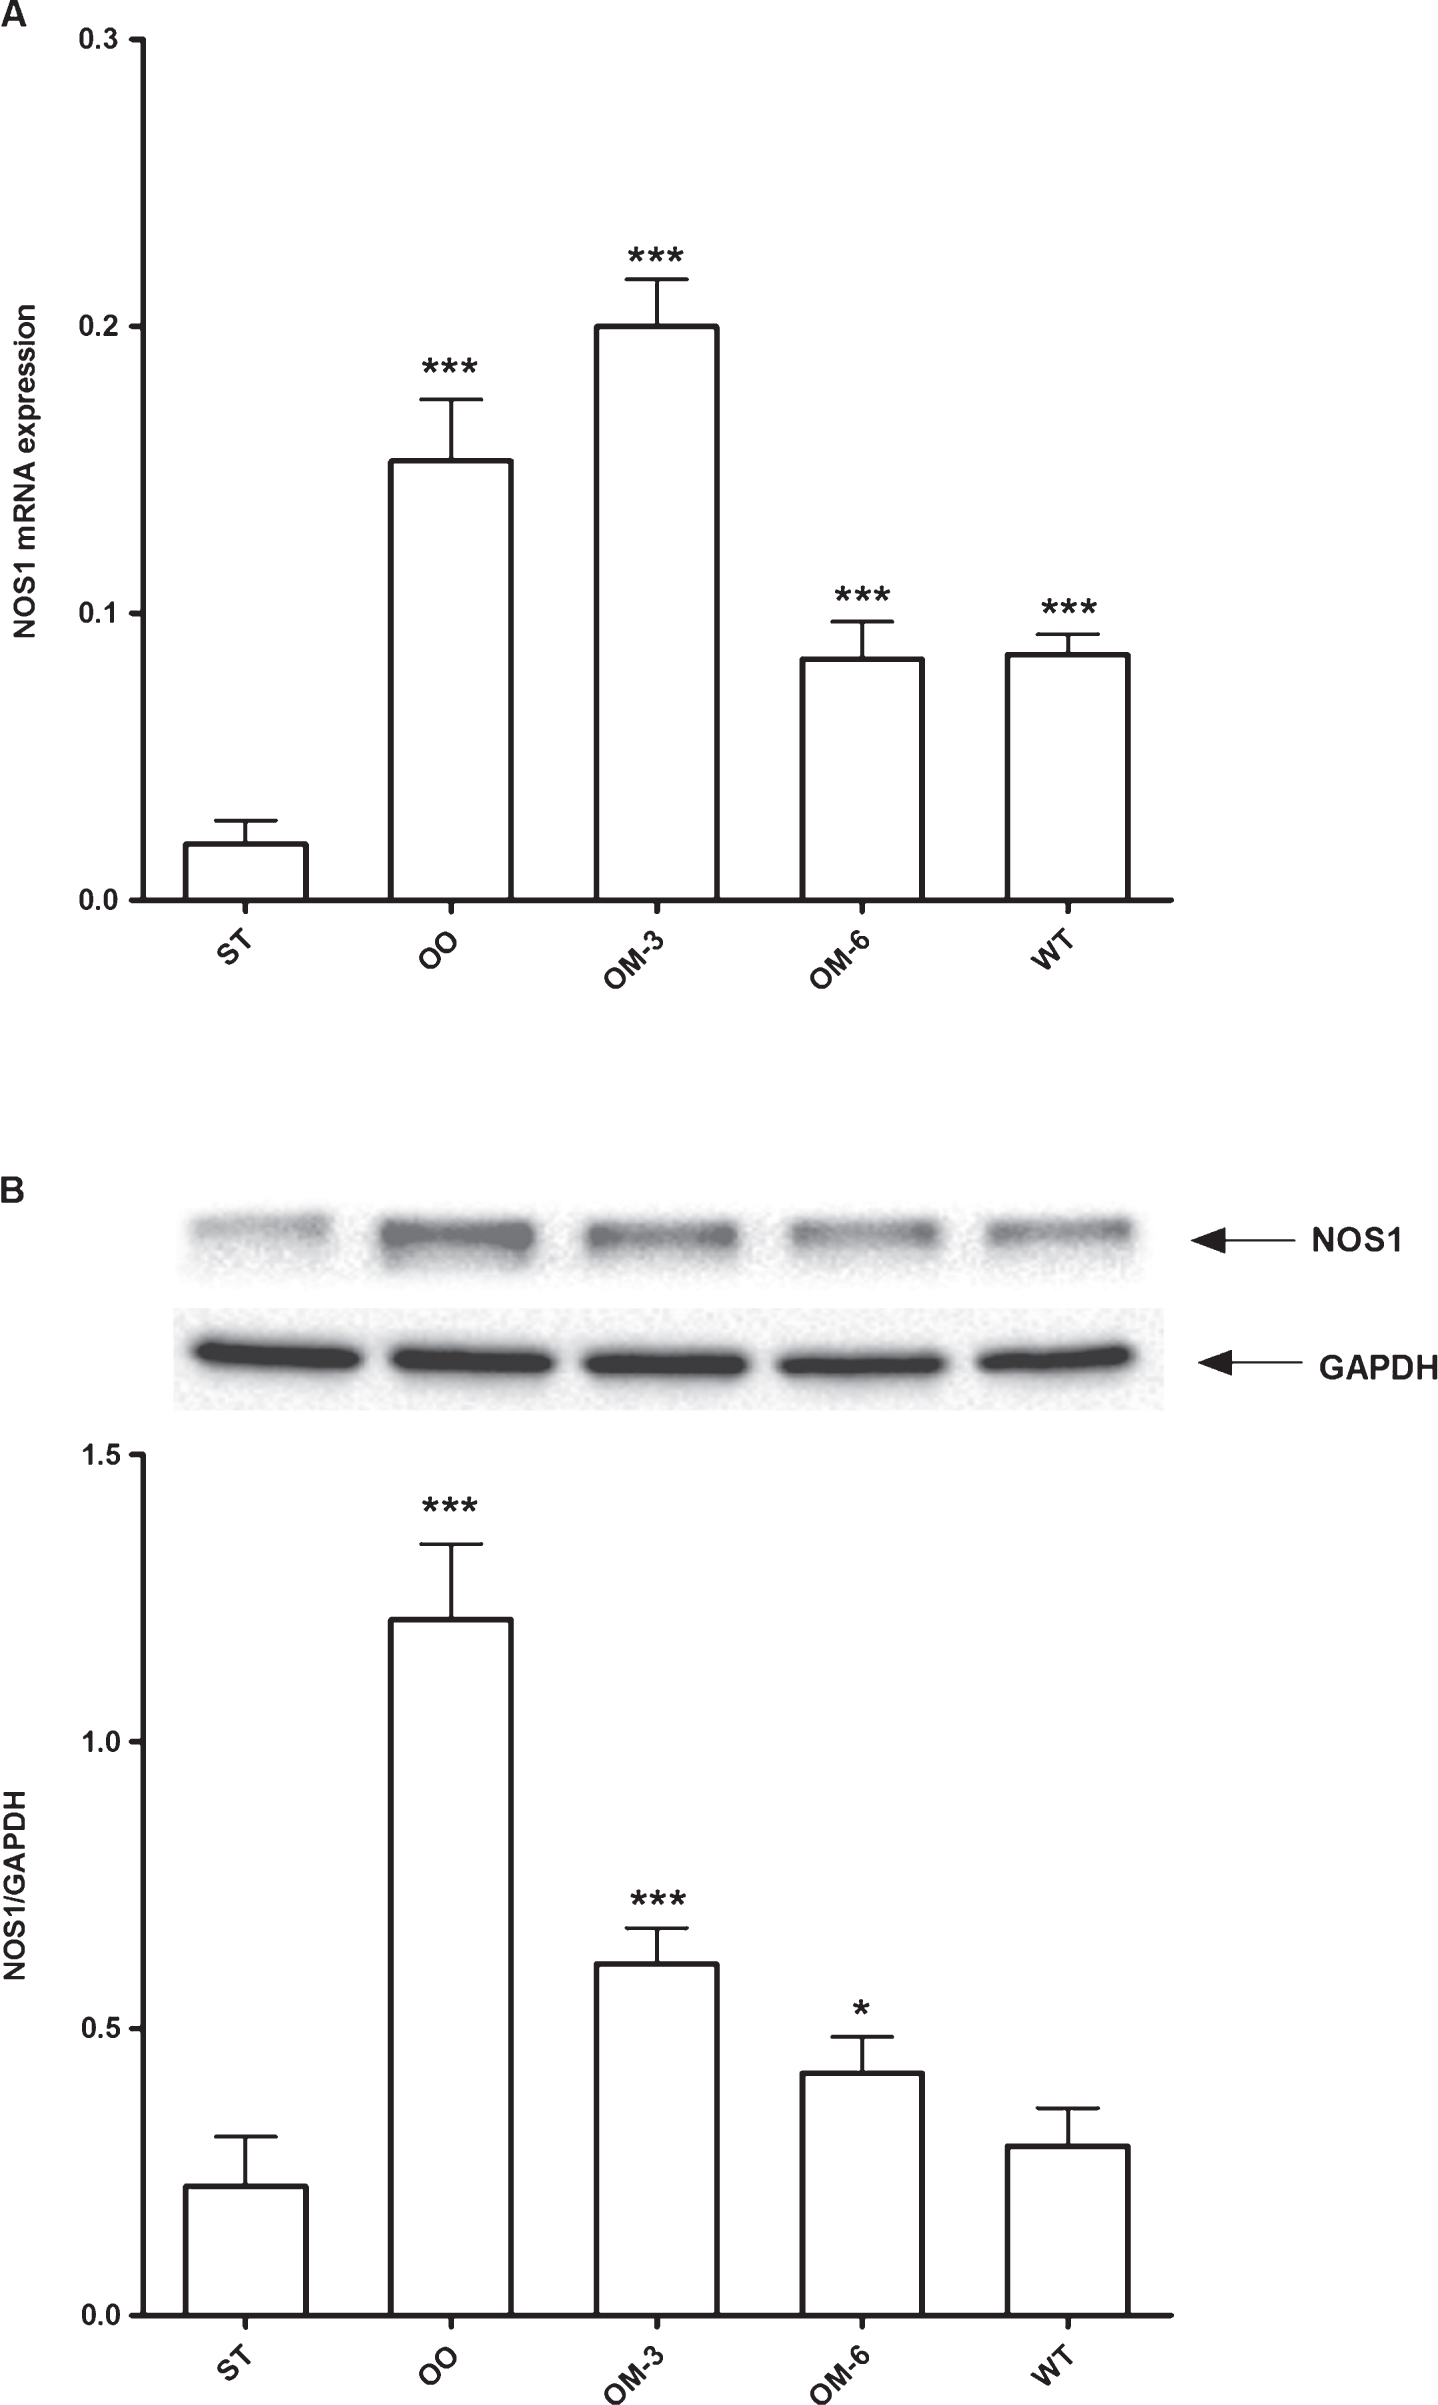 Panel A: NOS1 mRNA levels in adipose tissue from ApcMin/+ mice treated groups (ST = standard diet; OO = olive oil; OM-3 = omega-3 PUFAs; OM-6 = omega-6 PUFAs supplemented diet) and in the Wilde Type (WT) mice group. Data are presented as the mean±SE of ten animals for each group and expressed as n° molecules mRNA NOS1 gene/n° molecules mRNA β-actin. Panel B: Western blotting analysis of NOS1protein in the same groups of treatment. Levels of NOS1 protein expression were normalized with Glyceraldeide 3-phosphate dehydrogenase (GAPDH) protein expression. *P < 0.05, ***P < 0.005 (one-way analysis of variance and Dunnett Post Test).